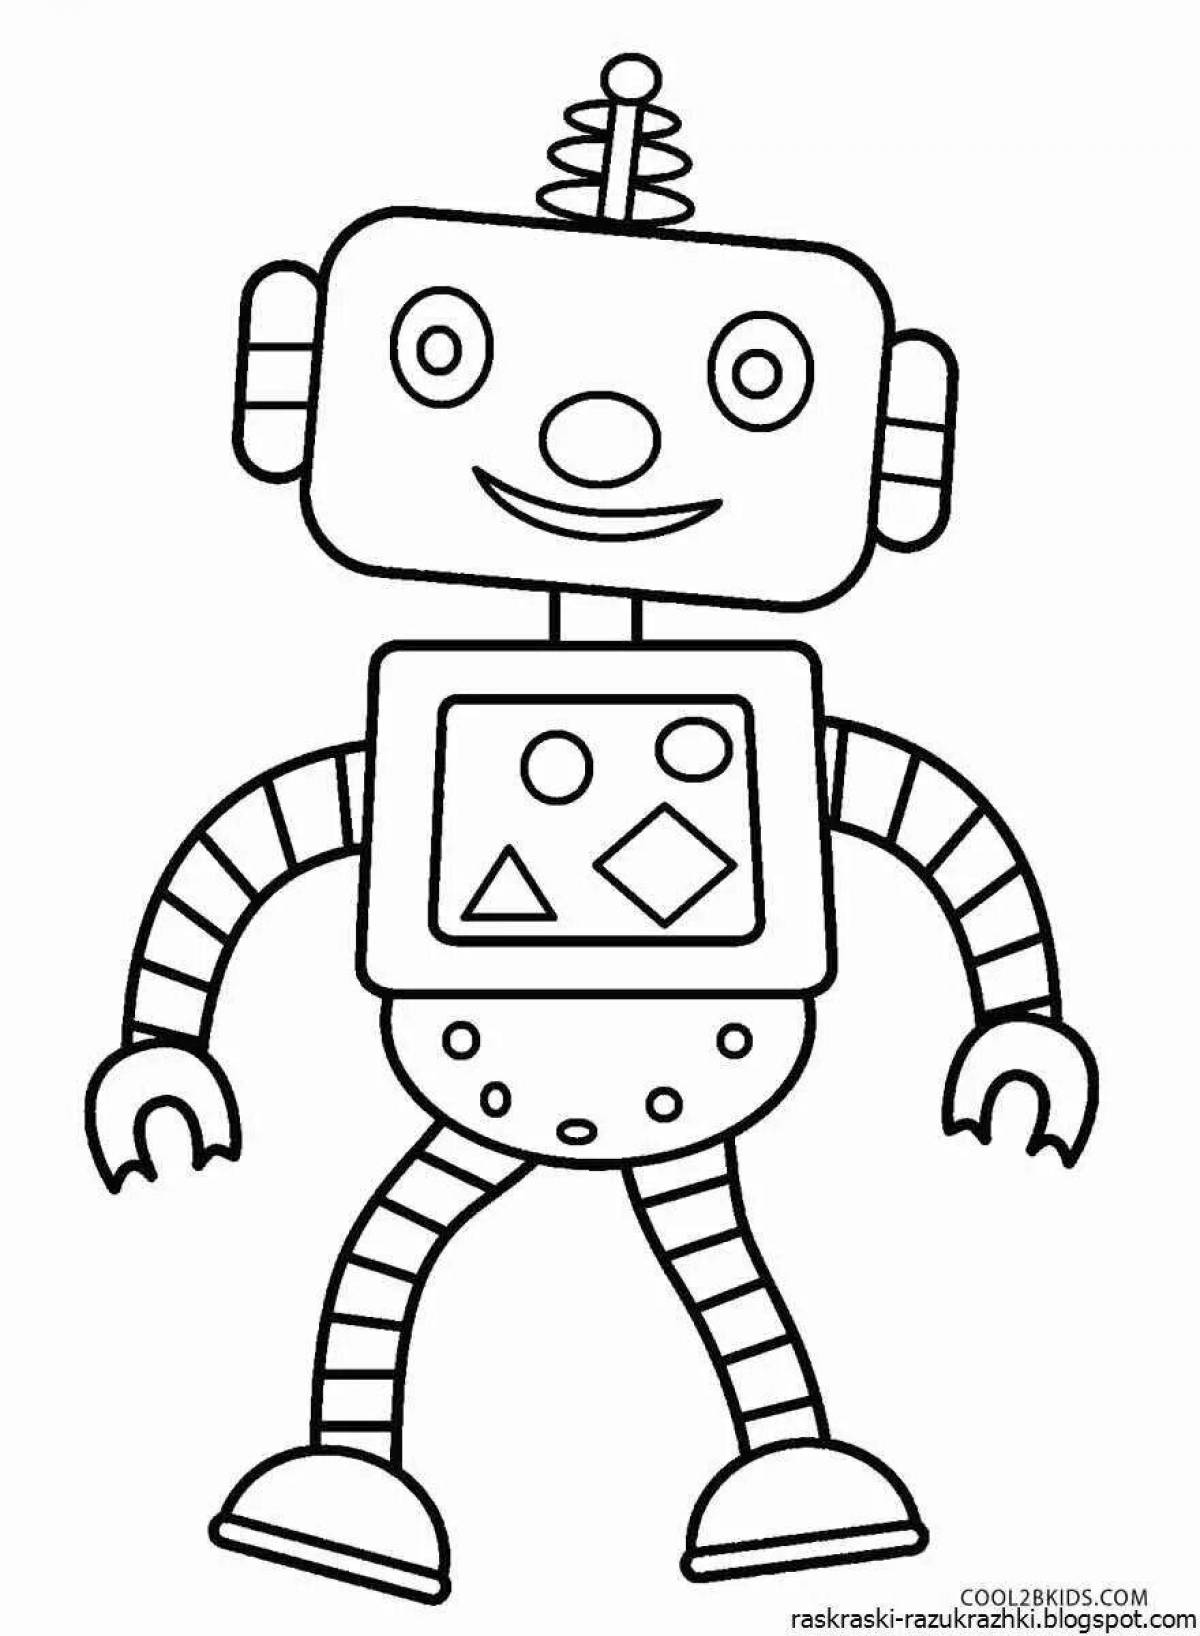 Robots for children 5 7 years old #12